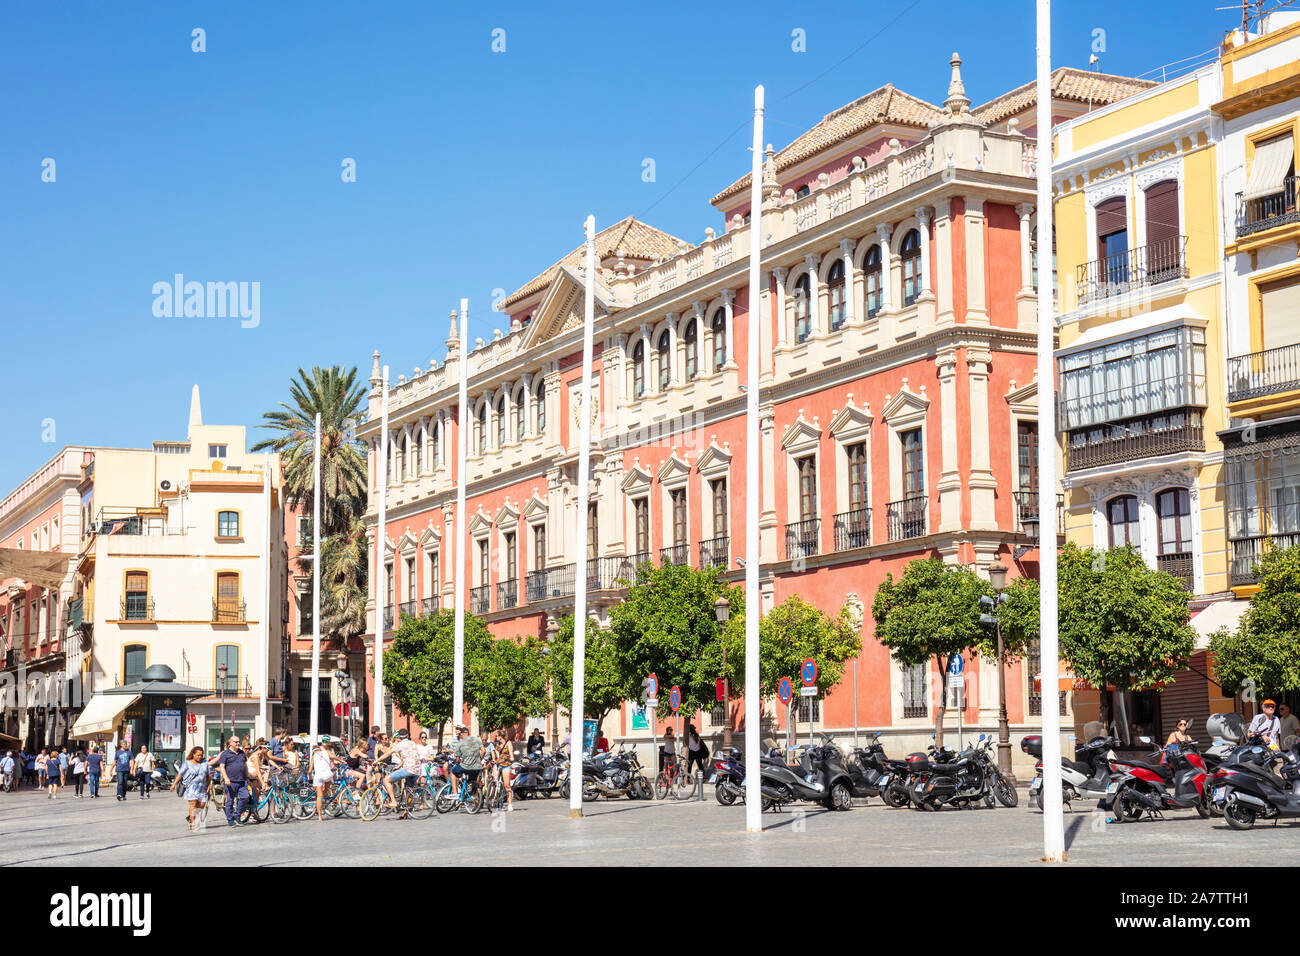 Cyclists on a city cycle tour gathering outside buildings with typical spanish architecture in the Plaza de San Francisco Seville Spain EU Europe Stock Photo